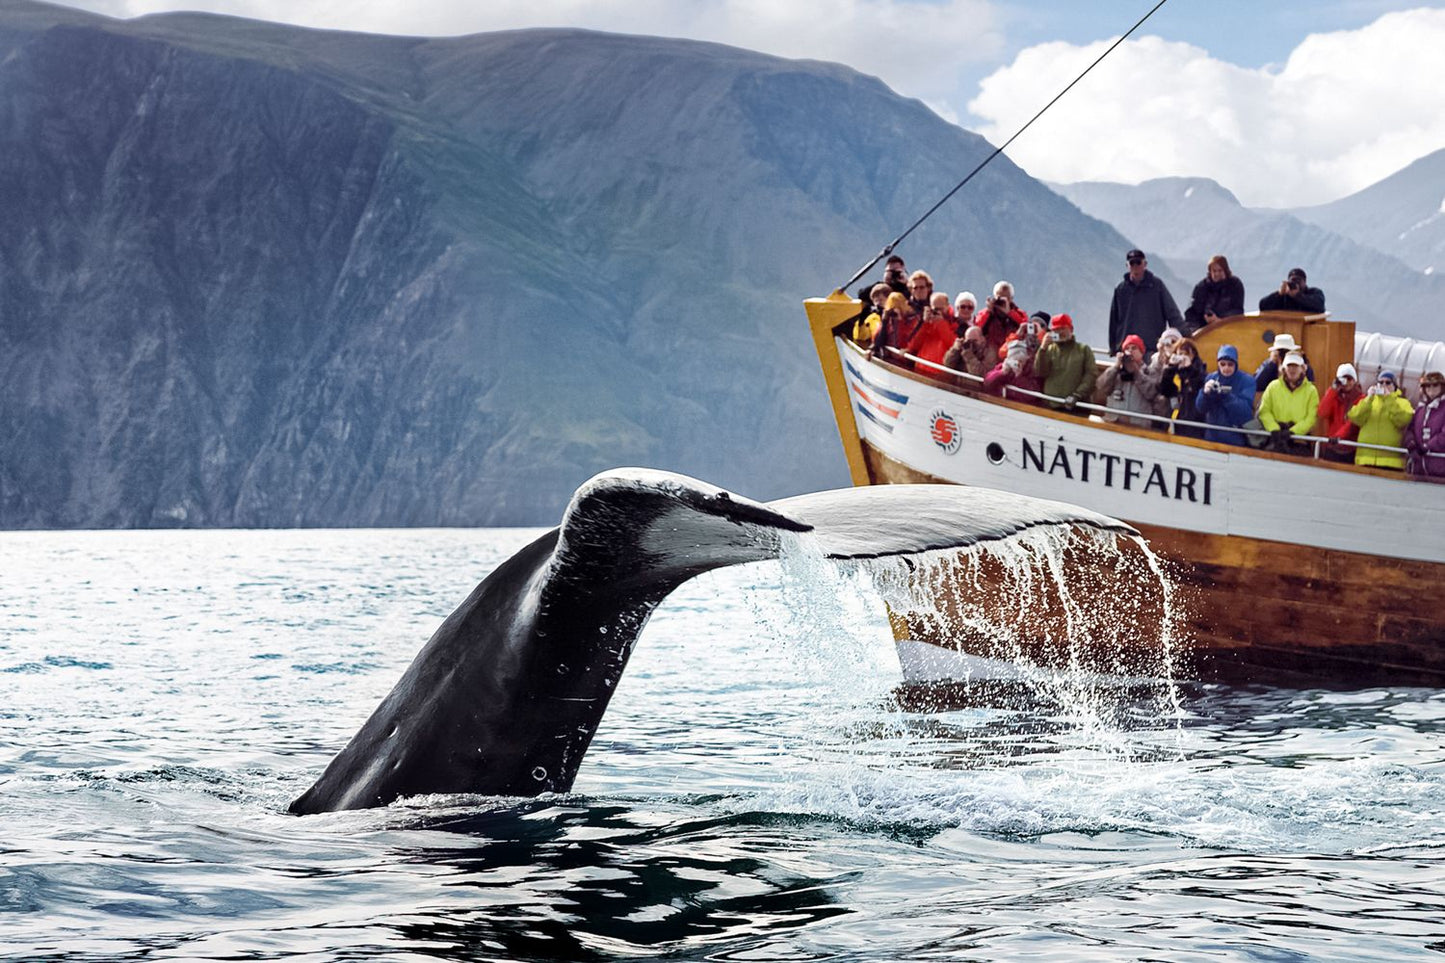 Husavik Ultimate Sea Expedition: Whale Watching and Sandoy Snorkeling Adventure